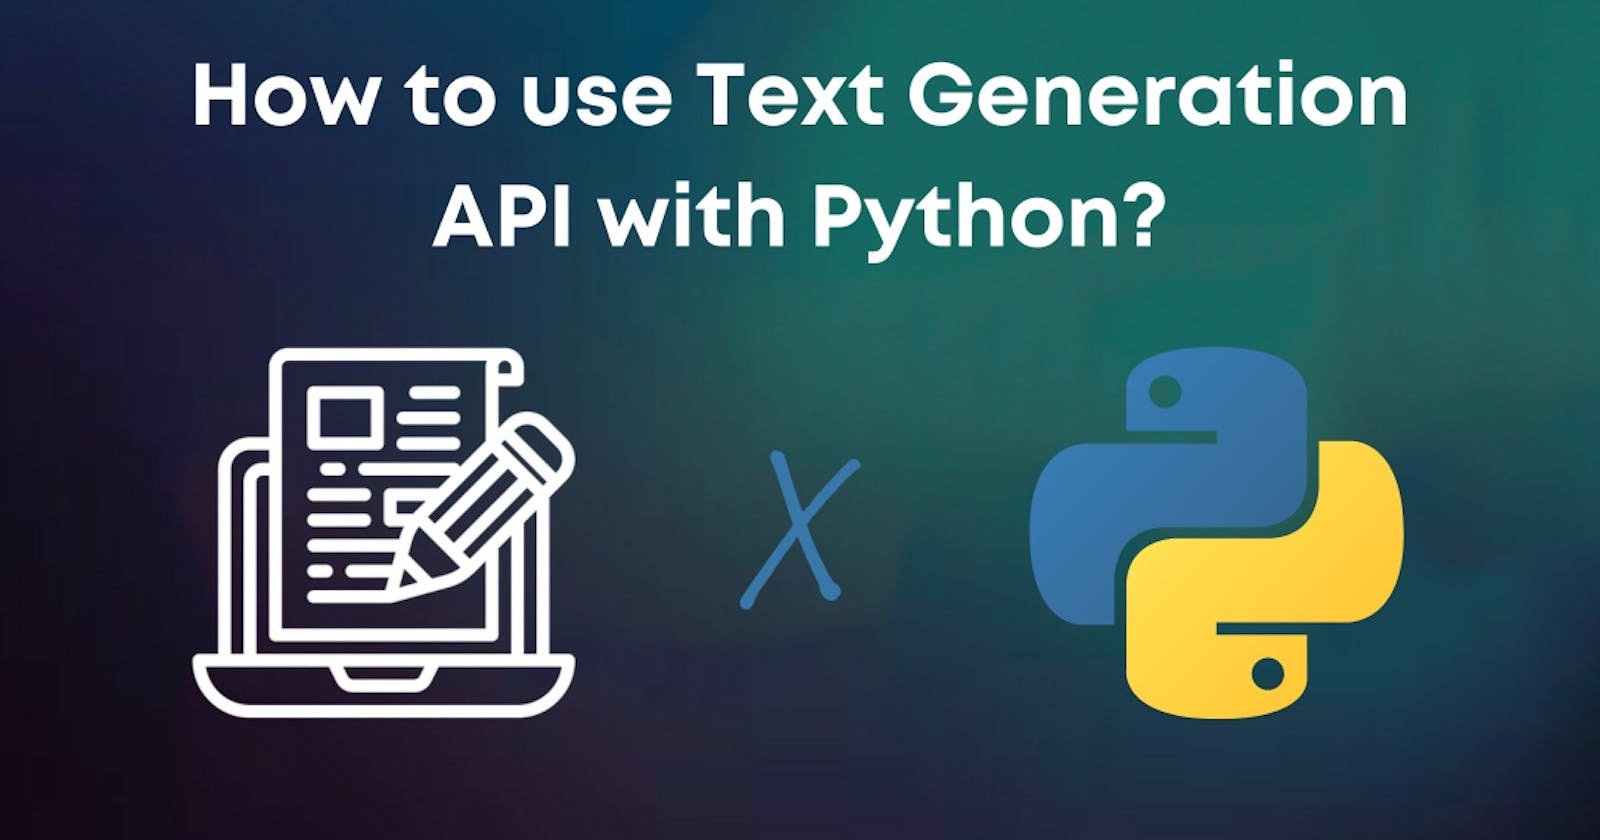 How to generate text with Python?